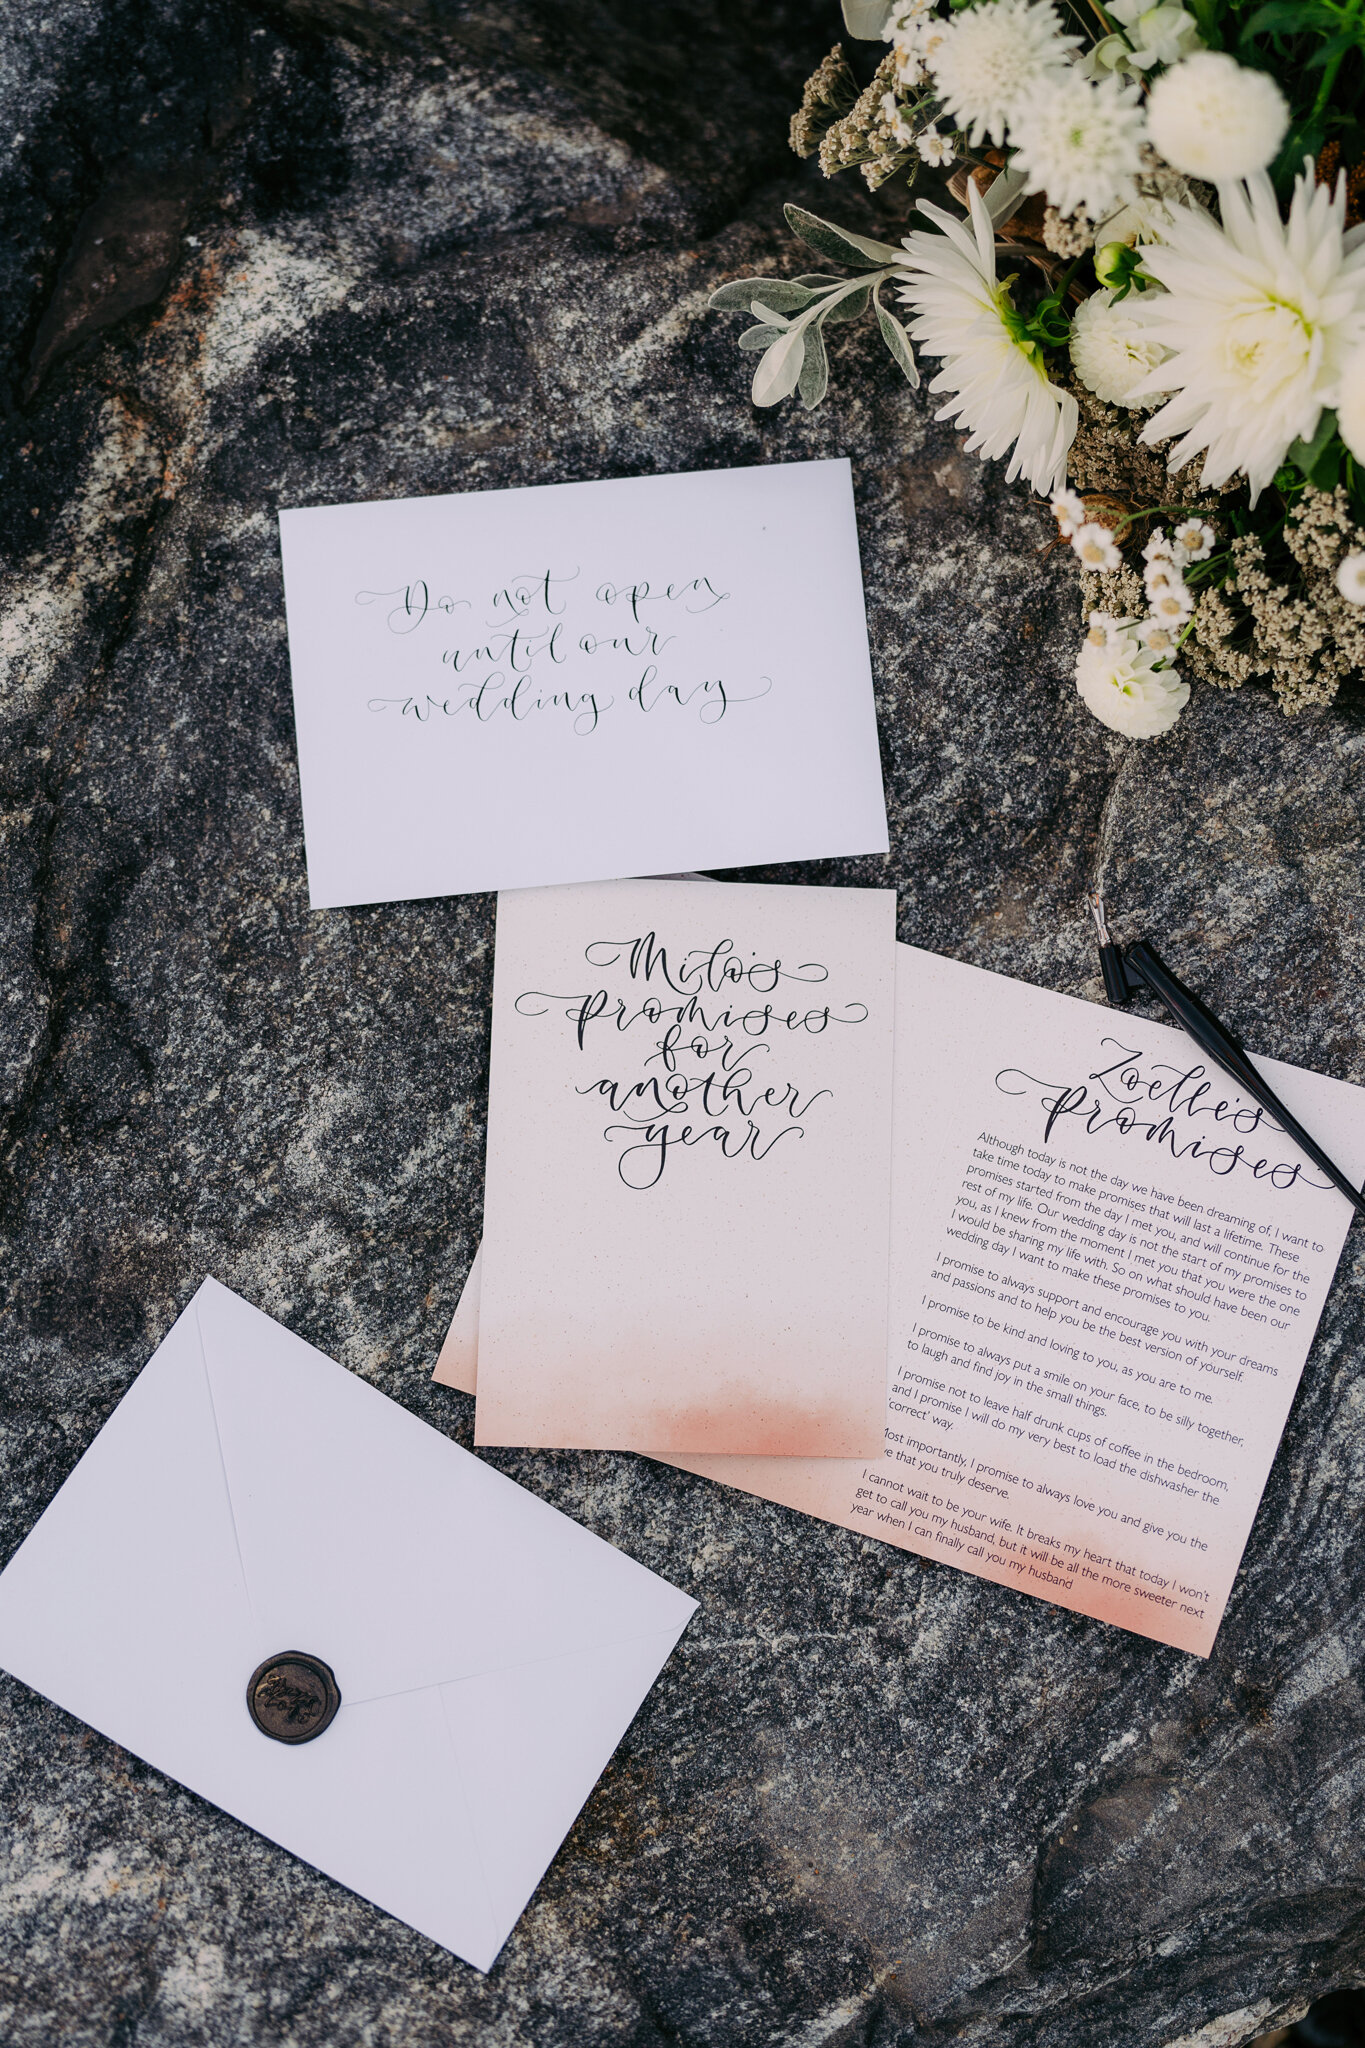 Promises for another year - personalised calligraphy vow books